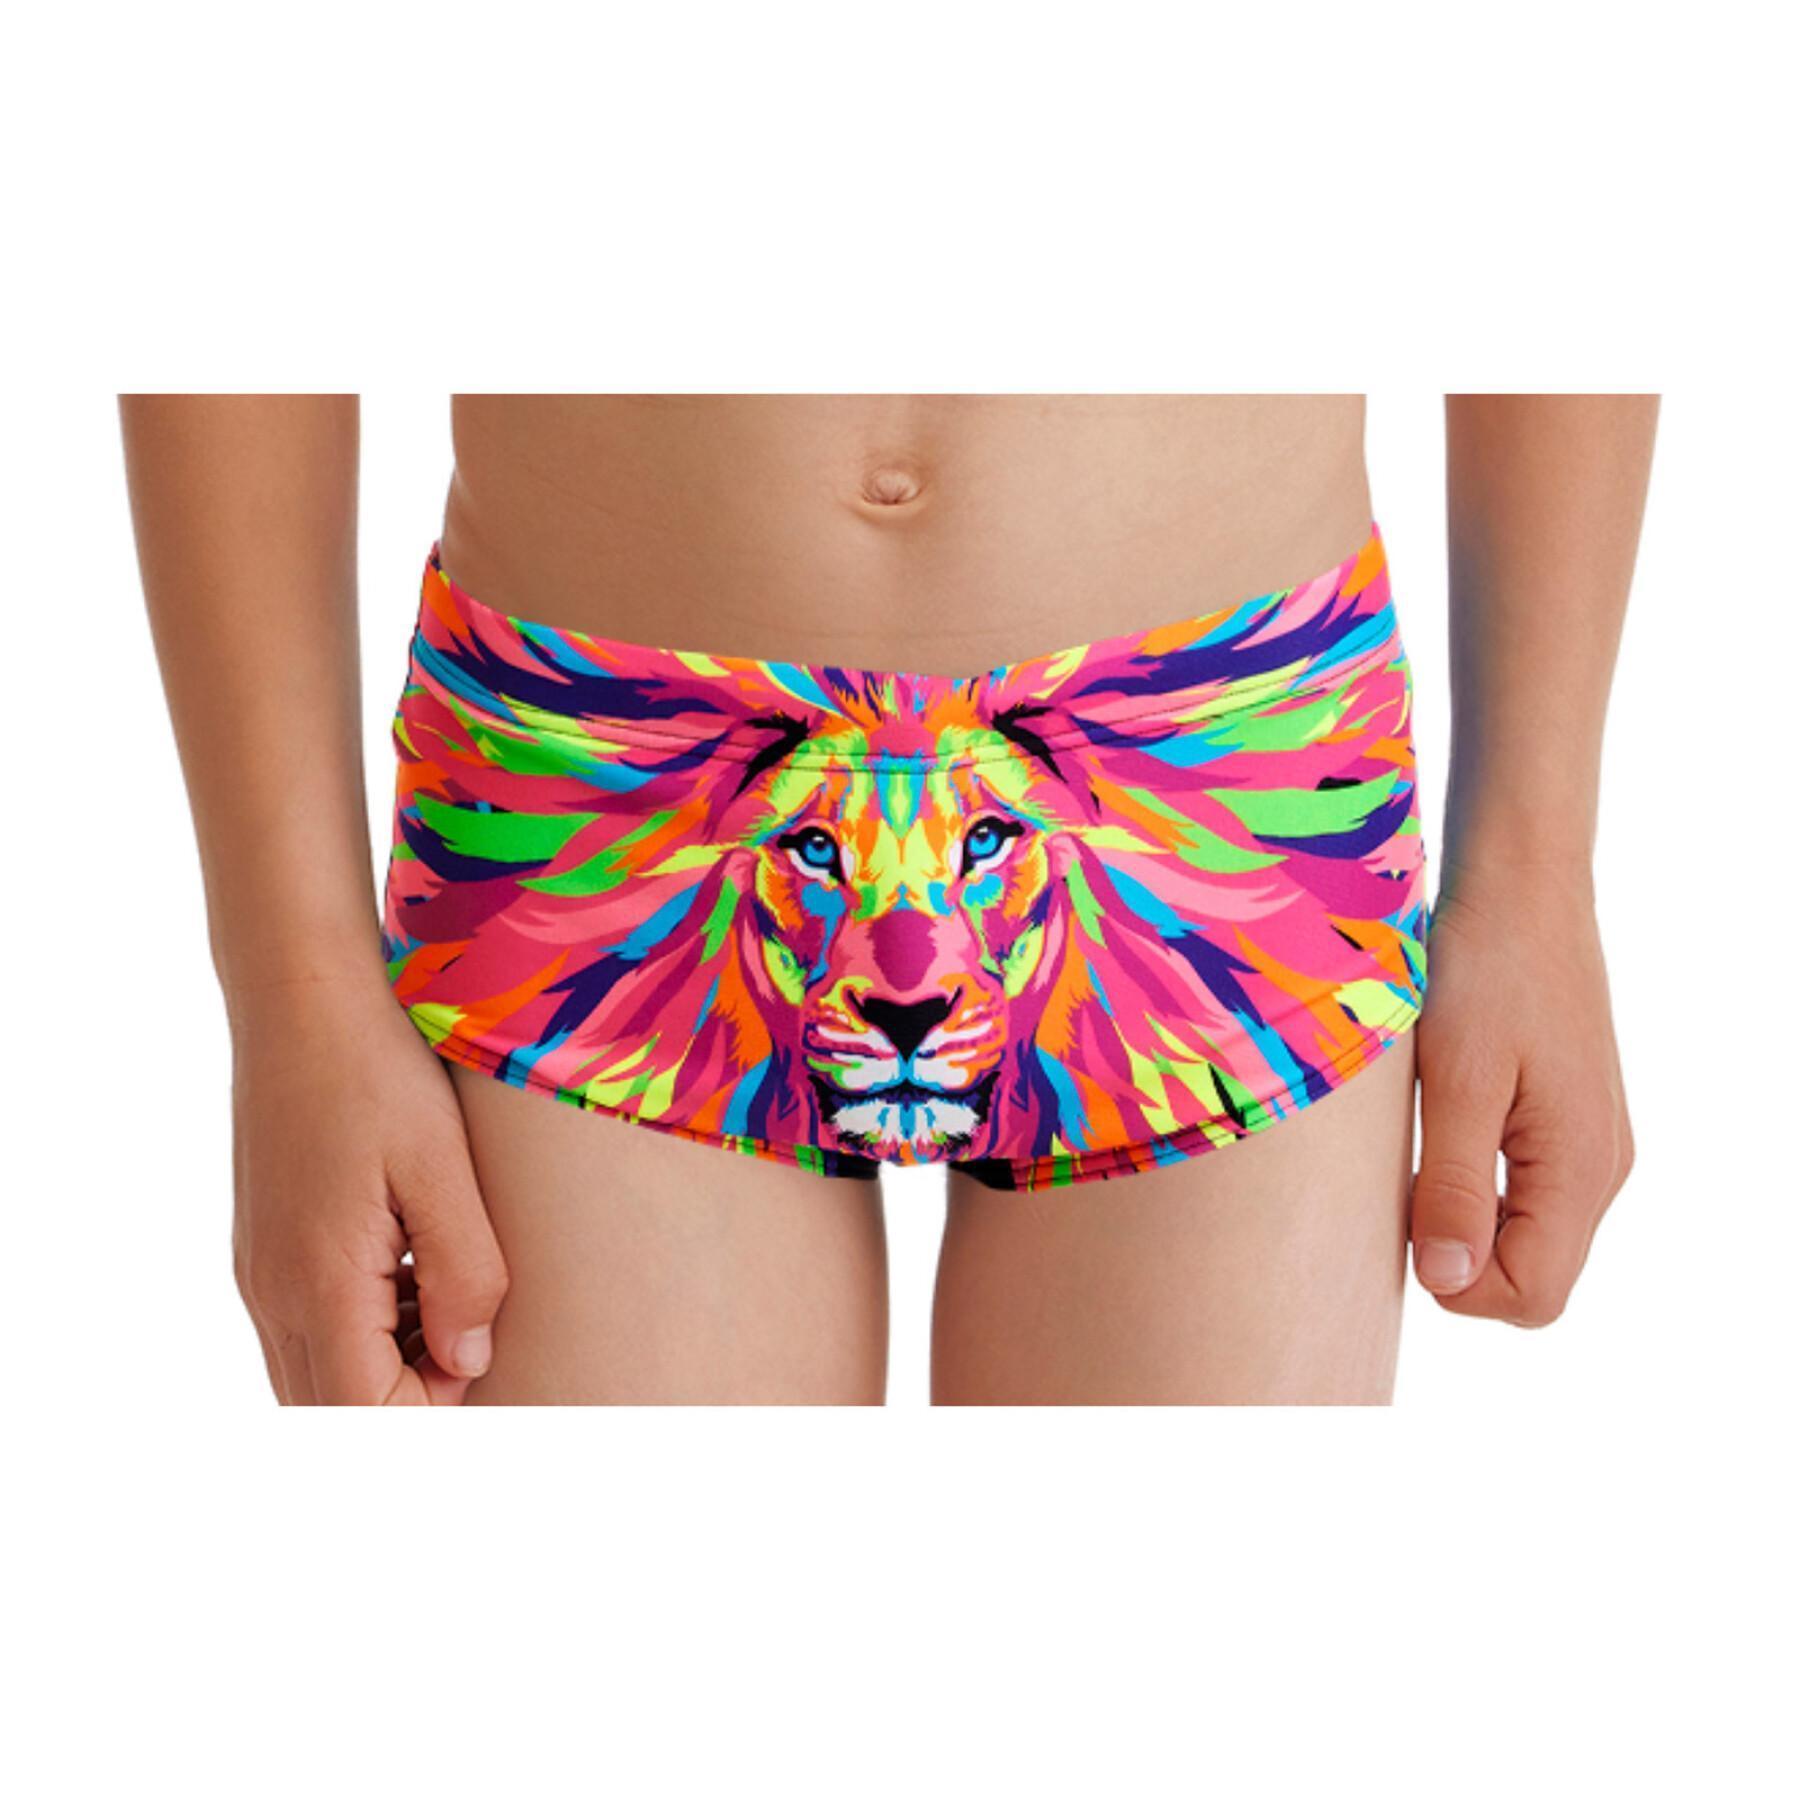 Printed swimsuit for kids Funky Trunks